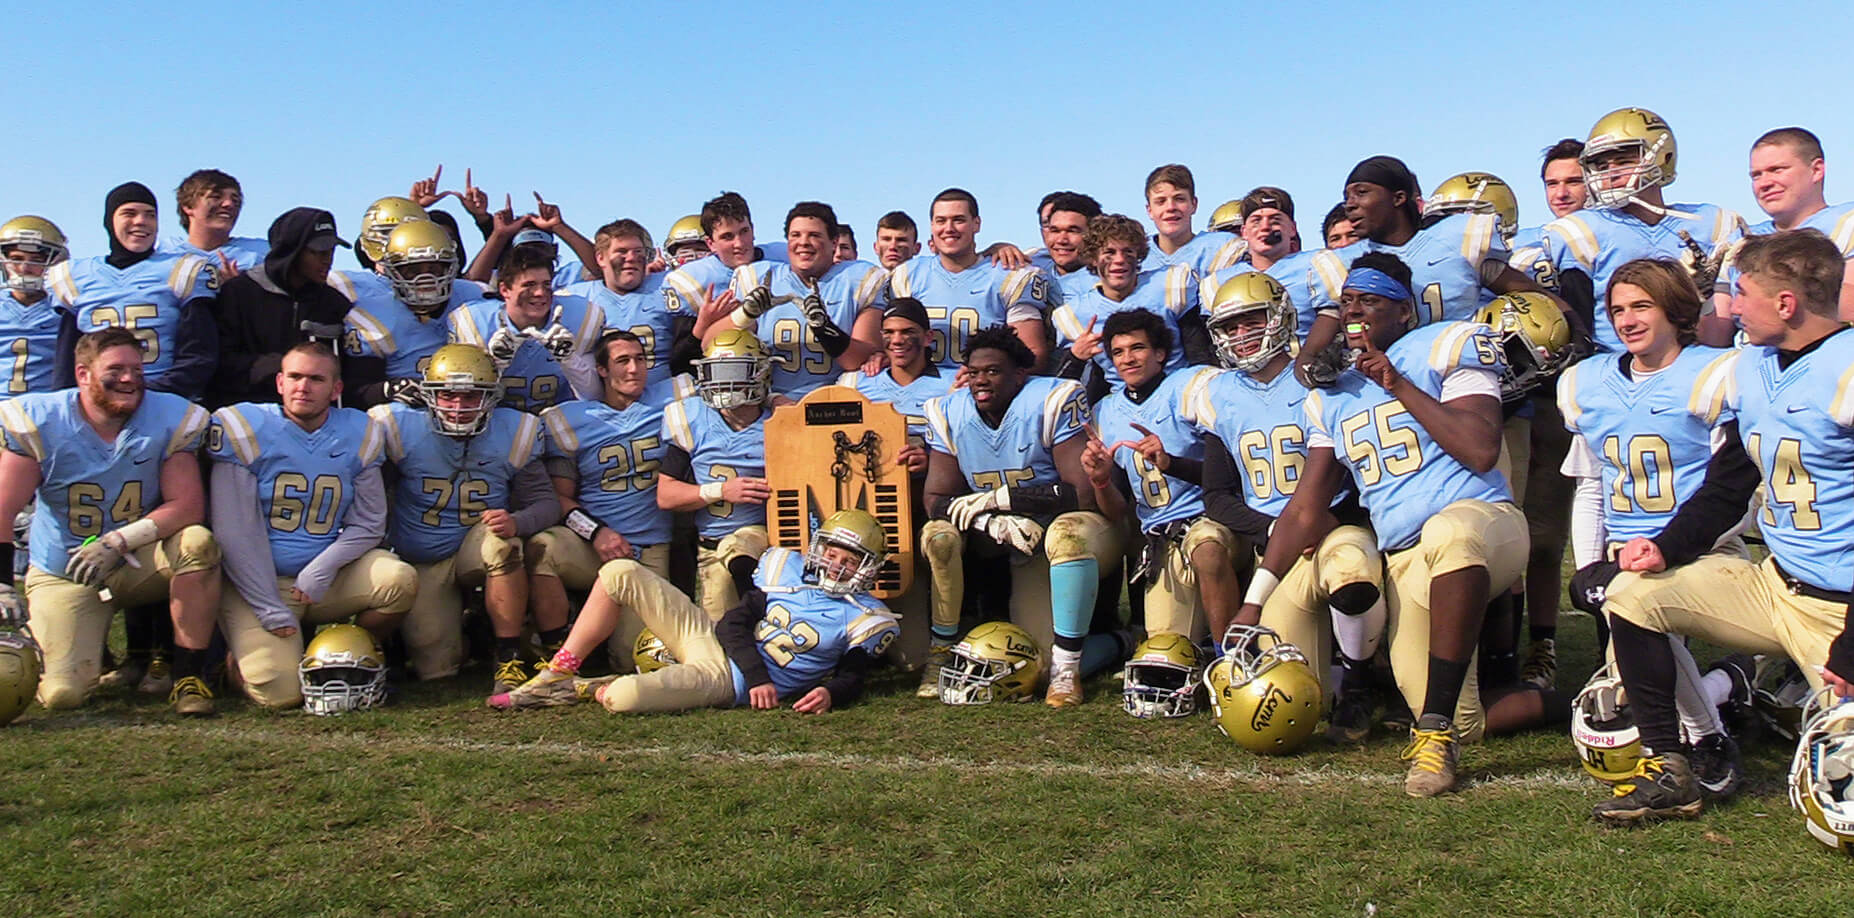 The Lower Cape May Regional High School football team celebrates their first Anchor Bowl title since 2011 in Erma on Thanksgiving Day.